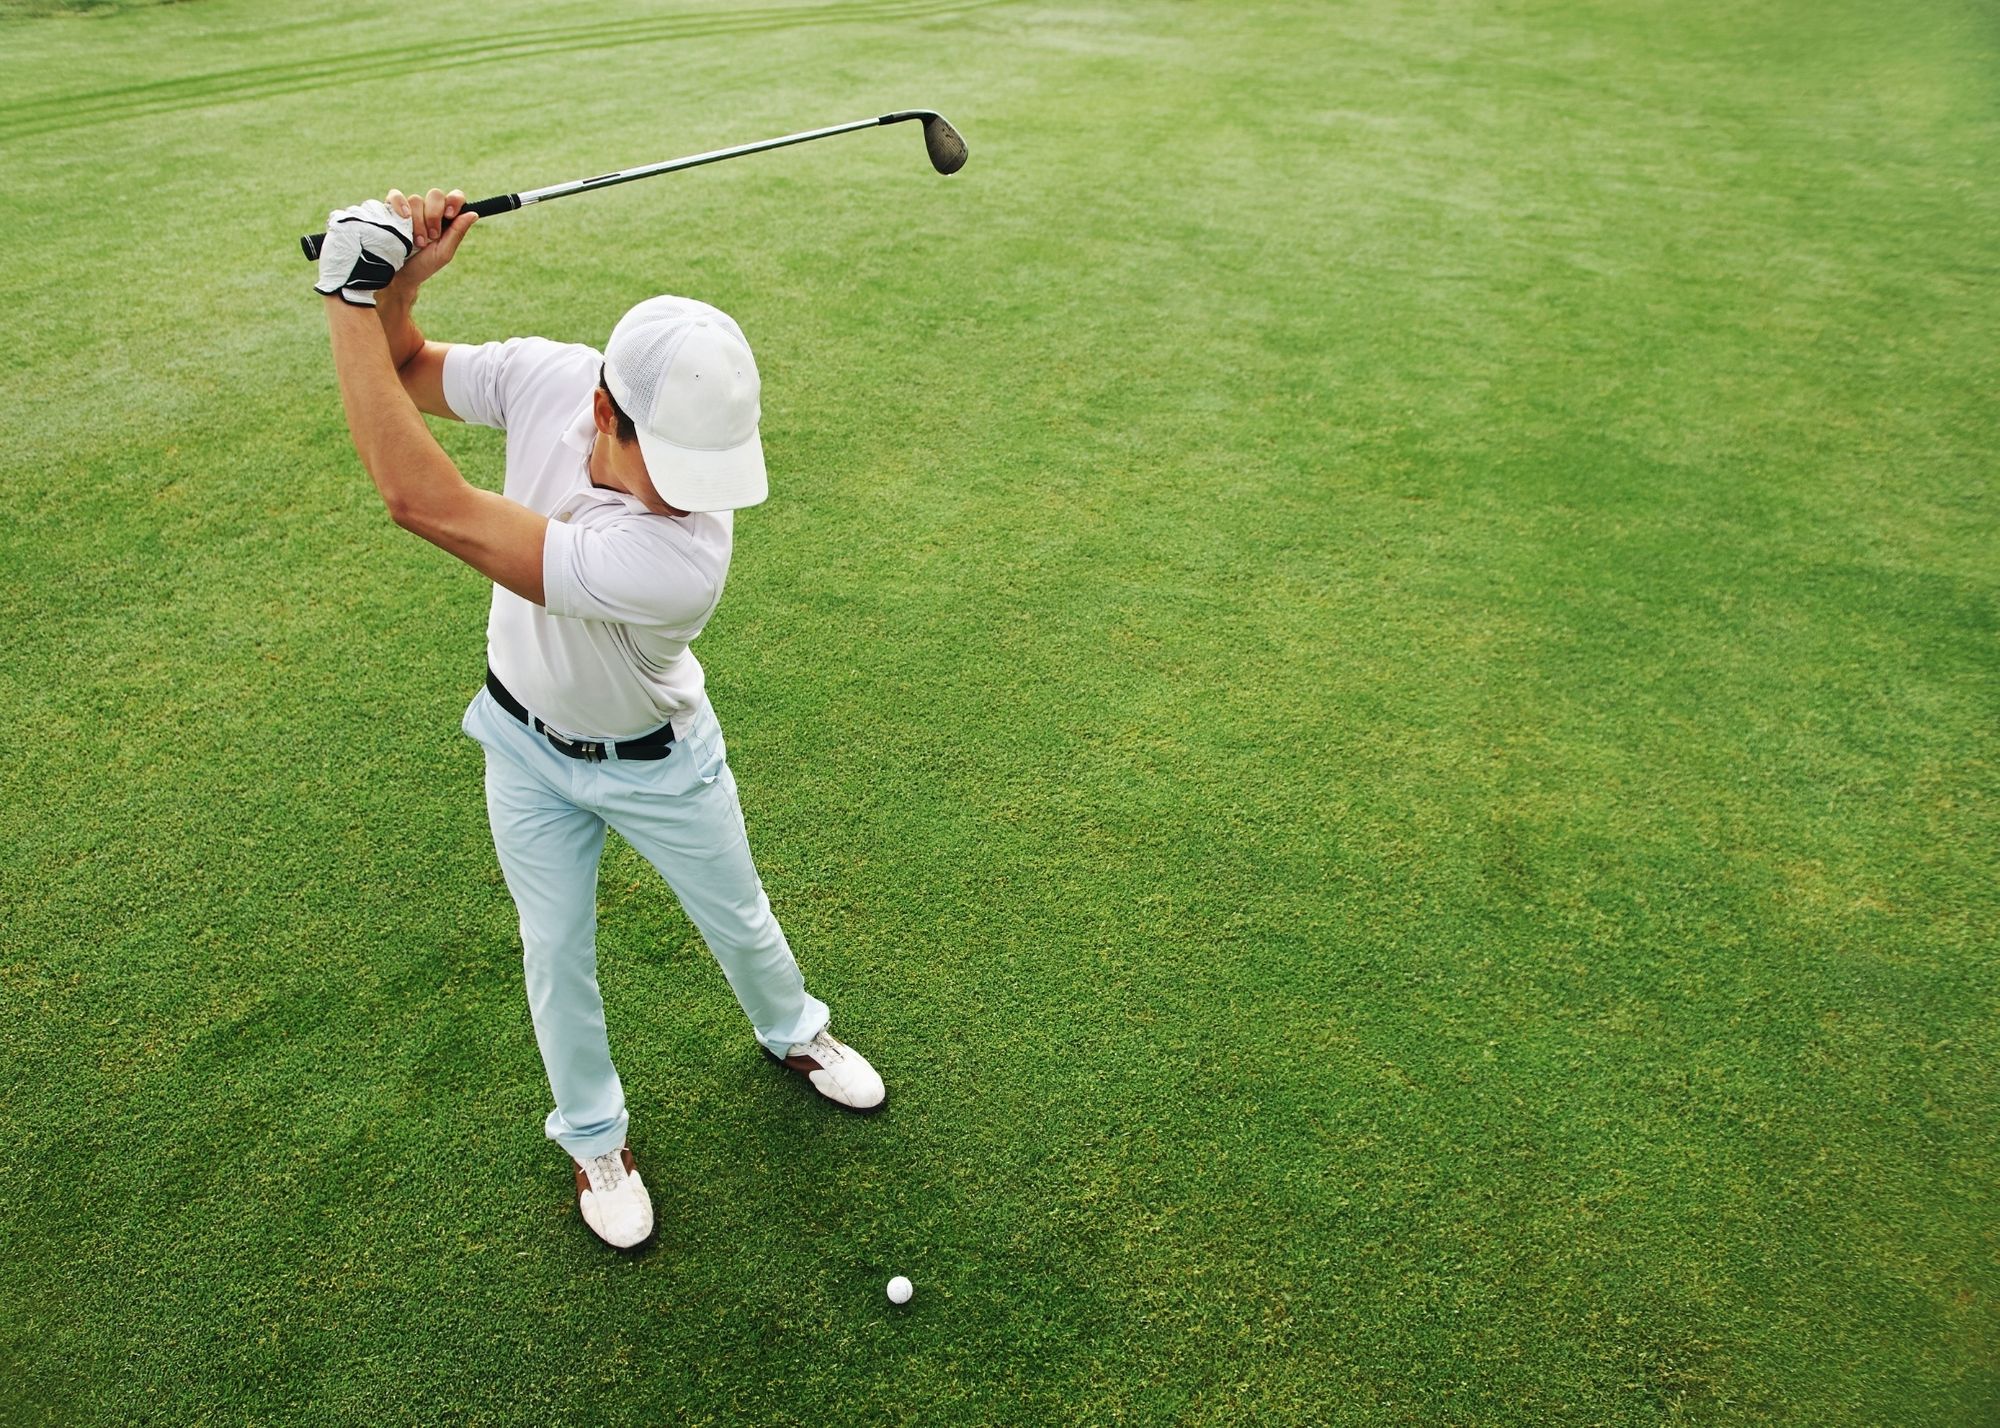 The Best Stretches To Warm Up For Golf